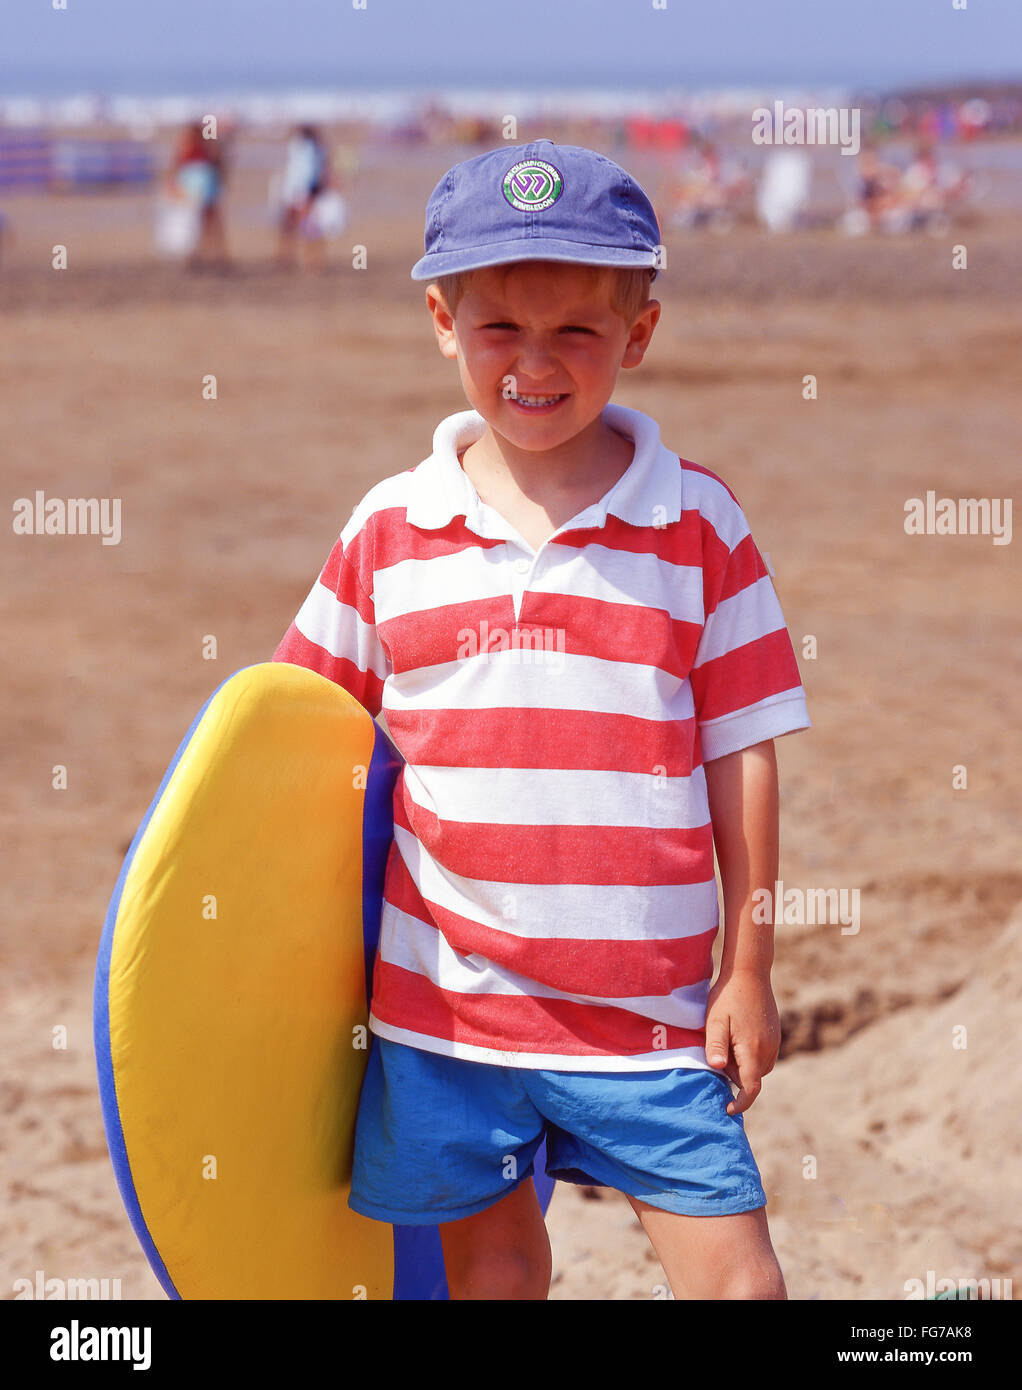 Young boy holding surfboard on beach, Bude, Devon, Angleterre, Royaume-Uni Banque D'Images